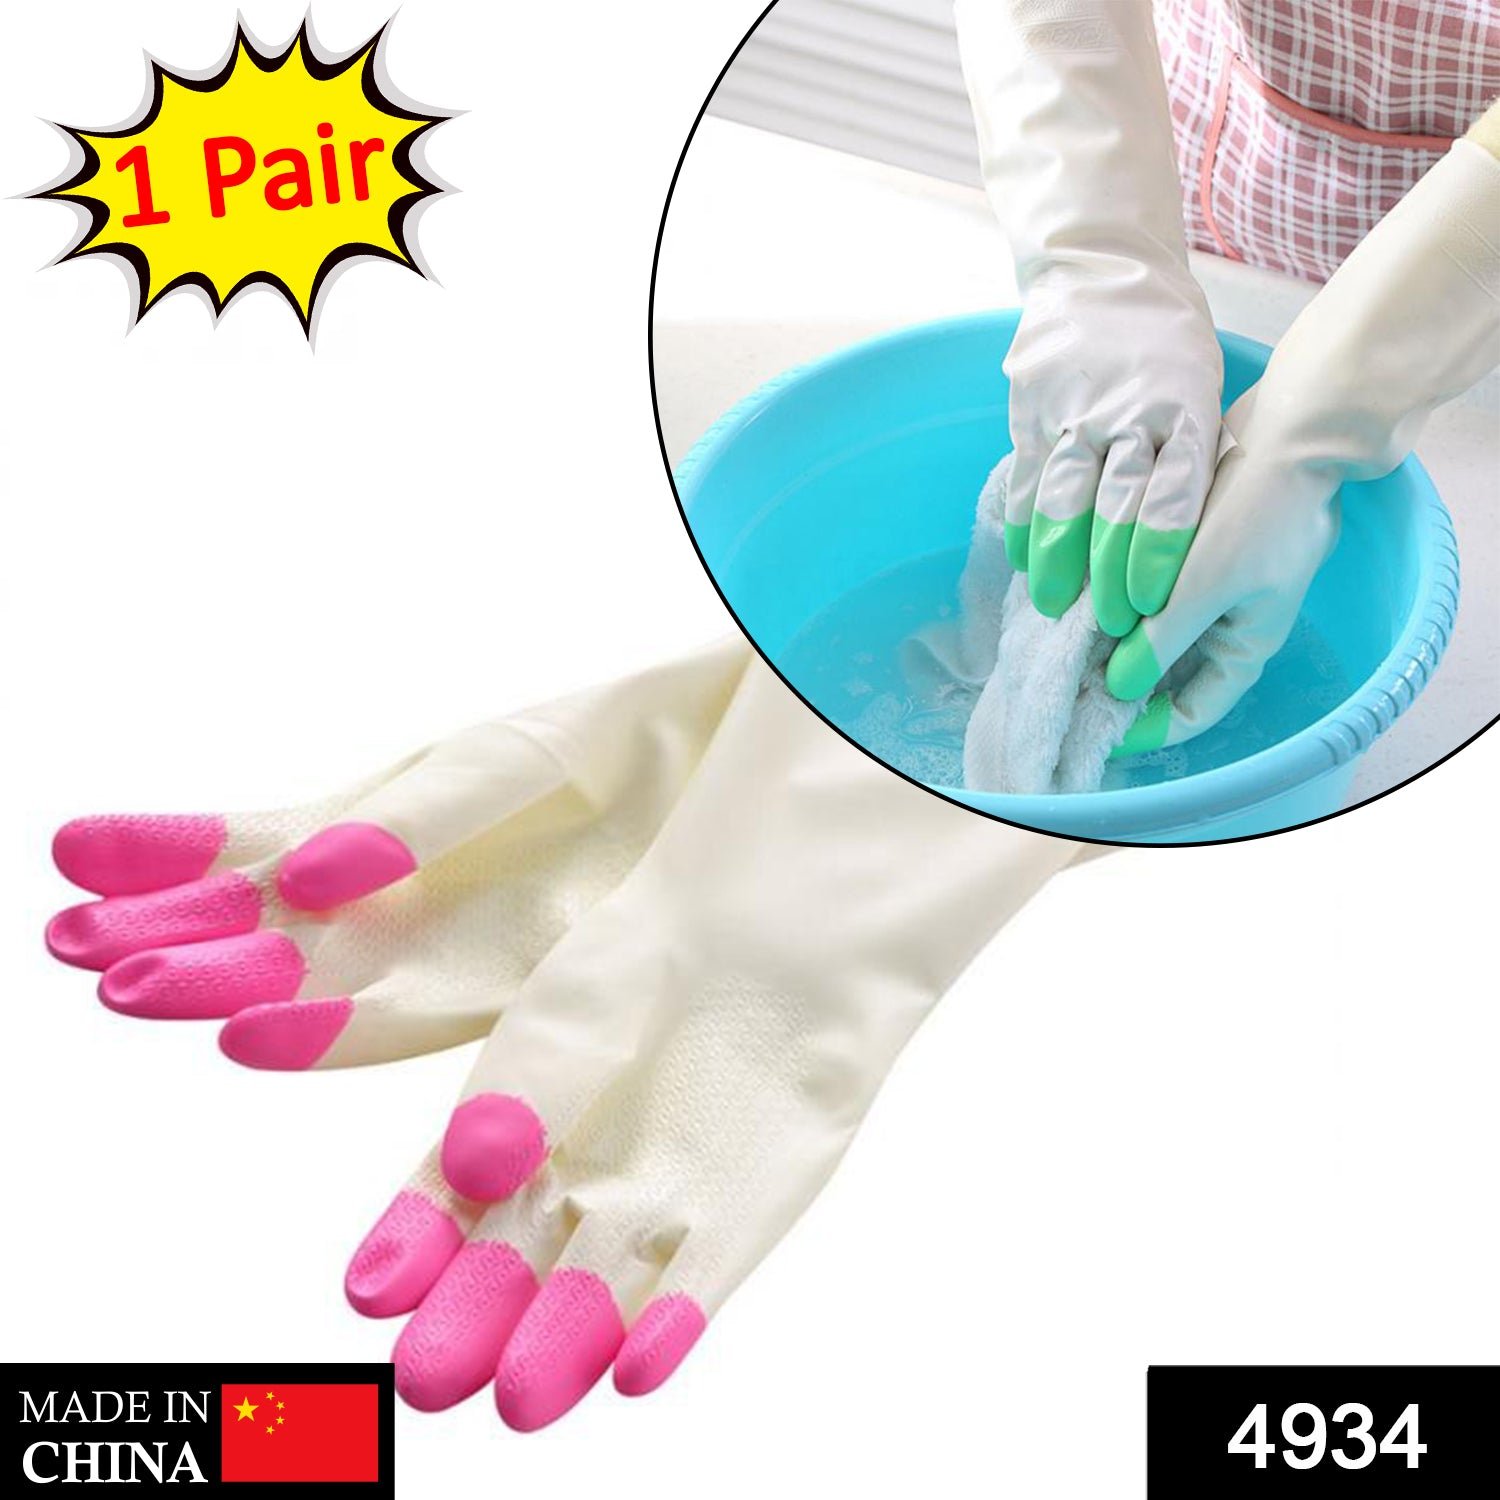 Reusable Rubber Latex PVC Flock lined Elbow Length Hand Gloves cleaning ...